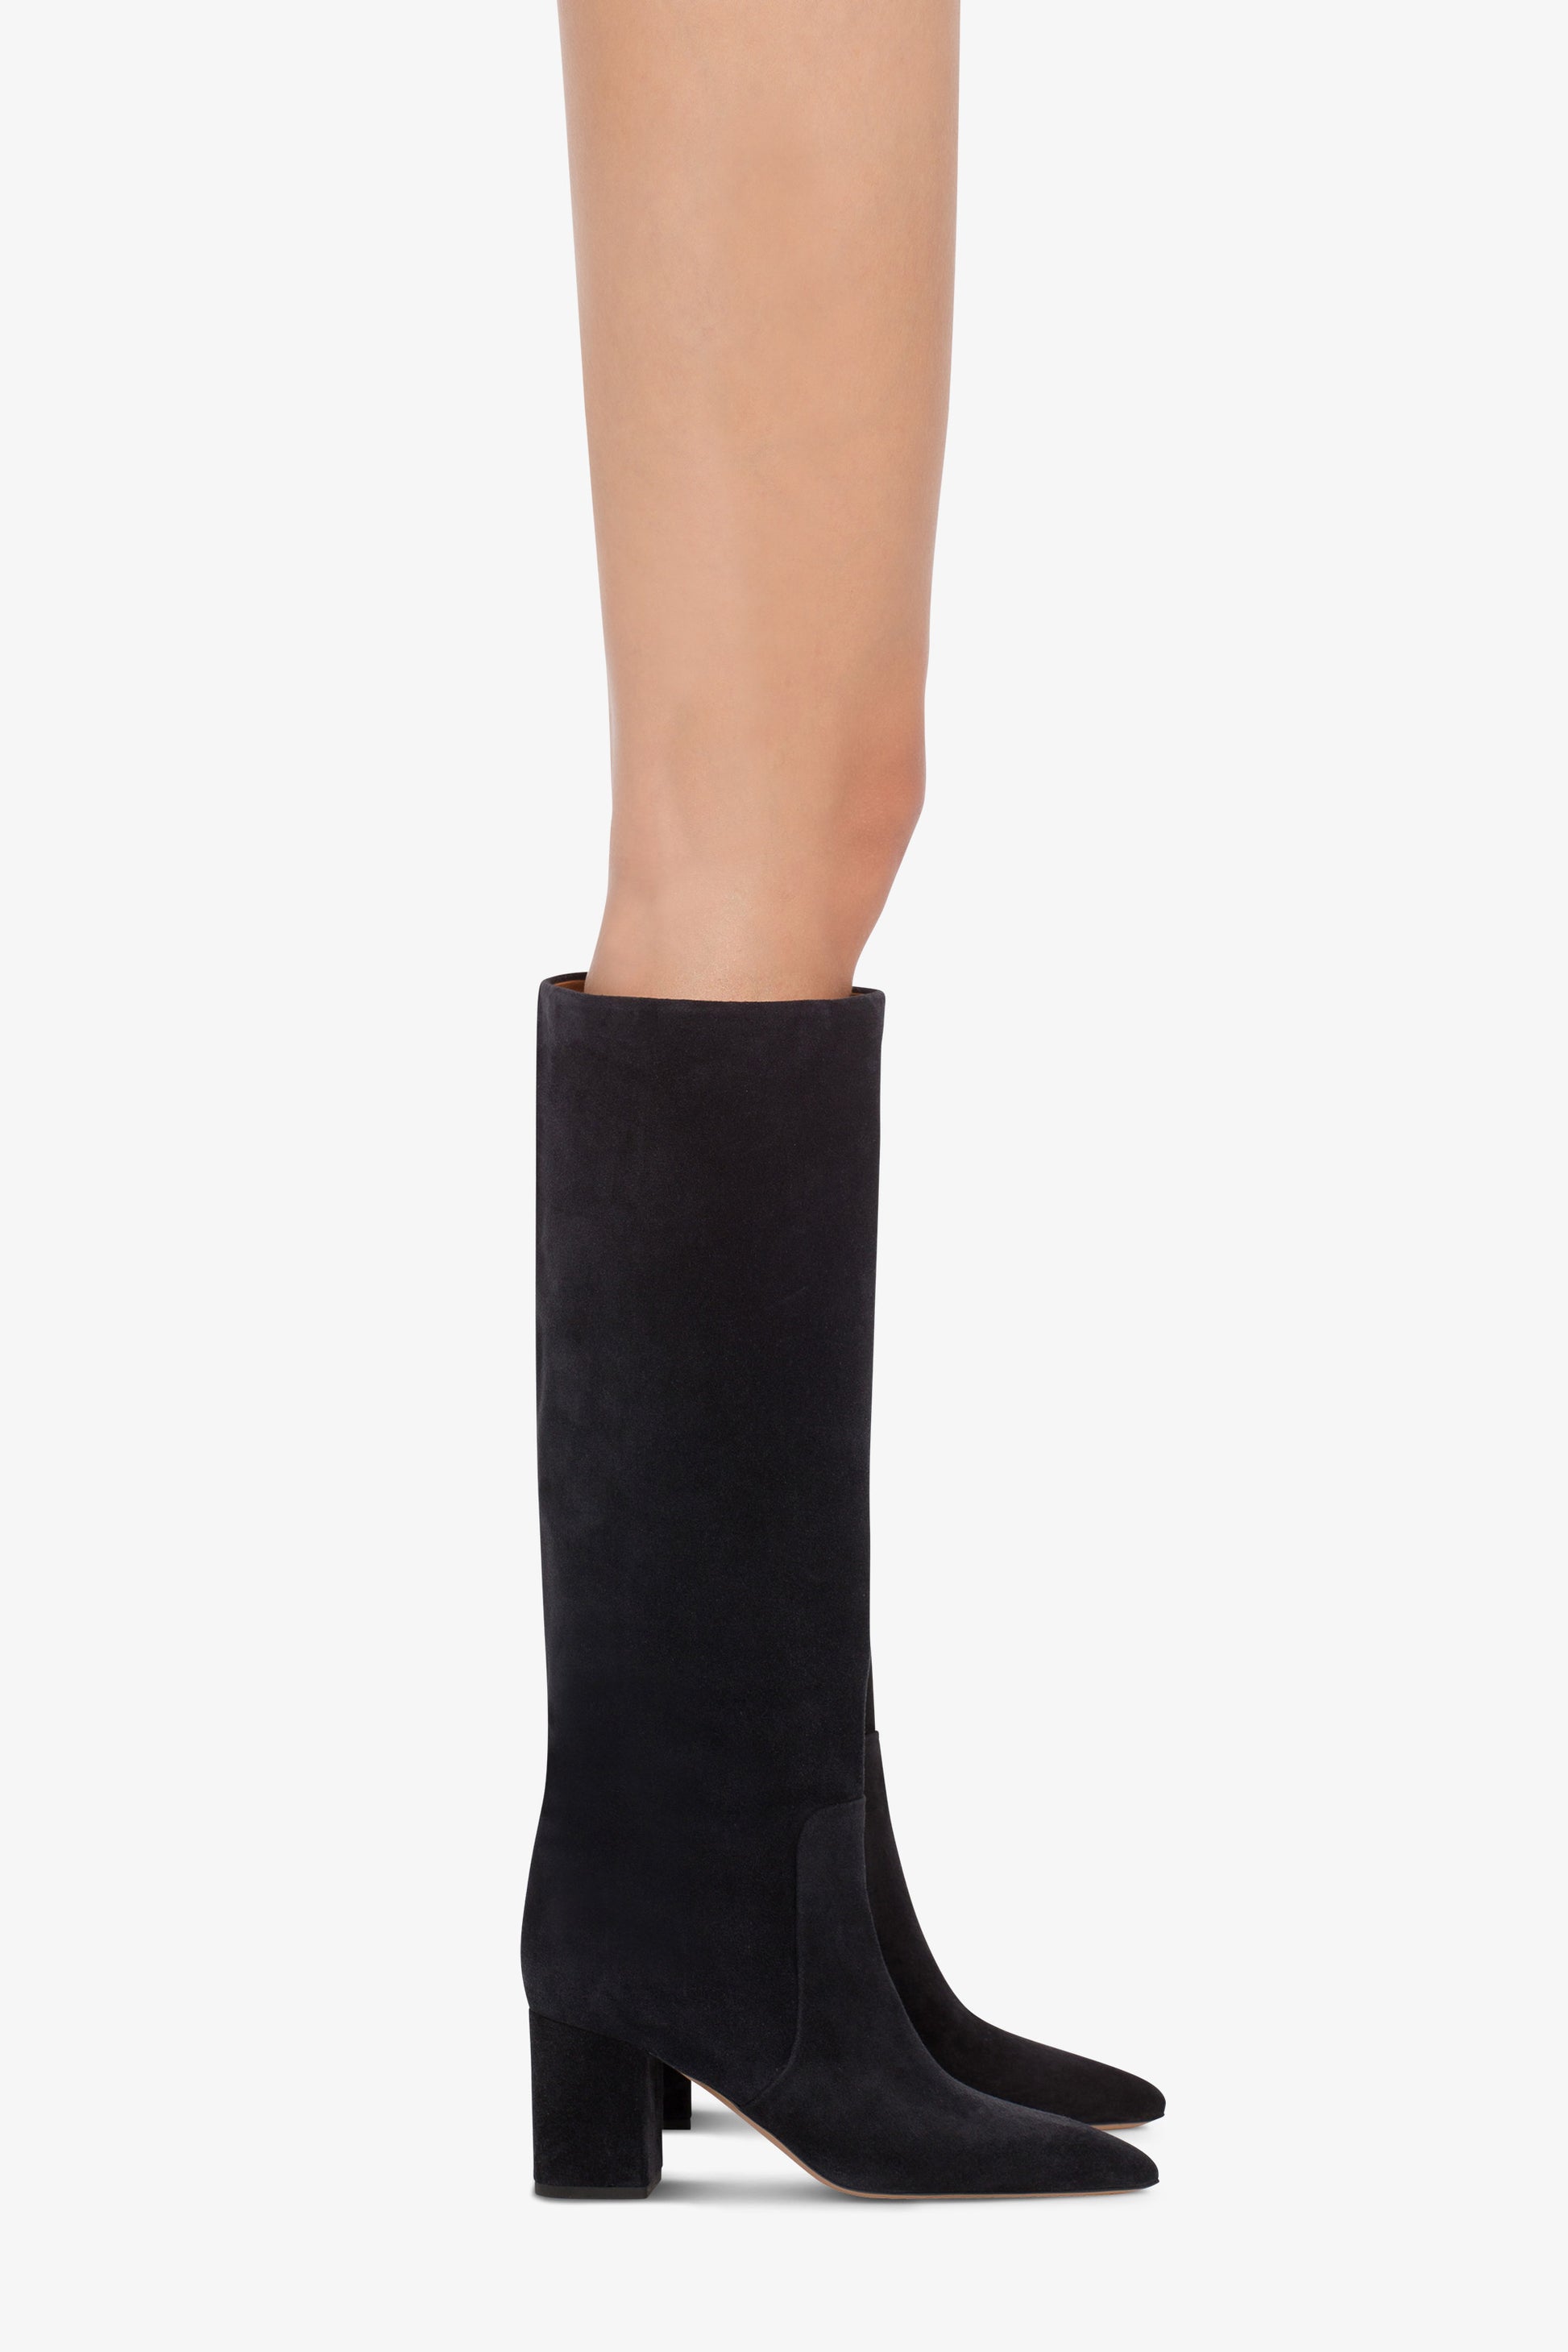 Knee-high boots in soft off-black suede leather - Product worn